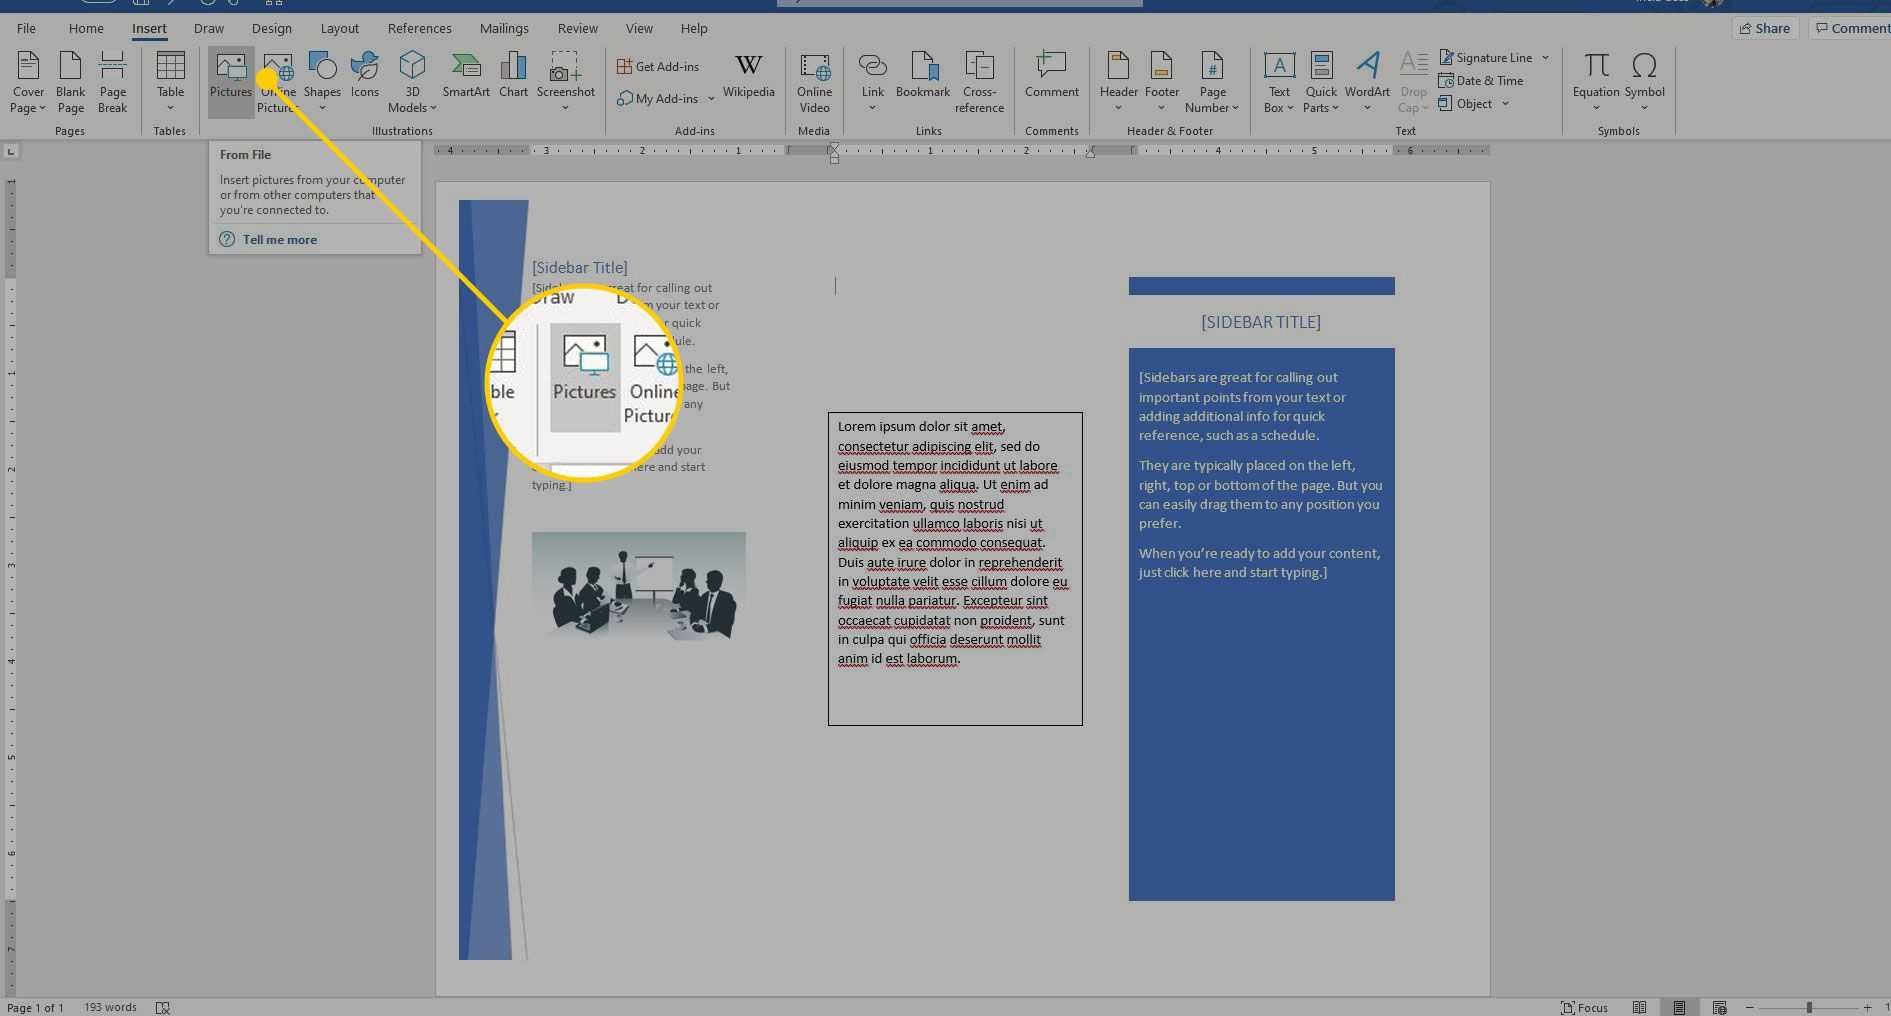 How To Make A Brochure On Microsoft Word Pertaining To Brochure Template On Microsoft Word